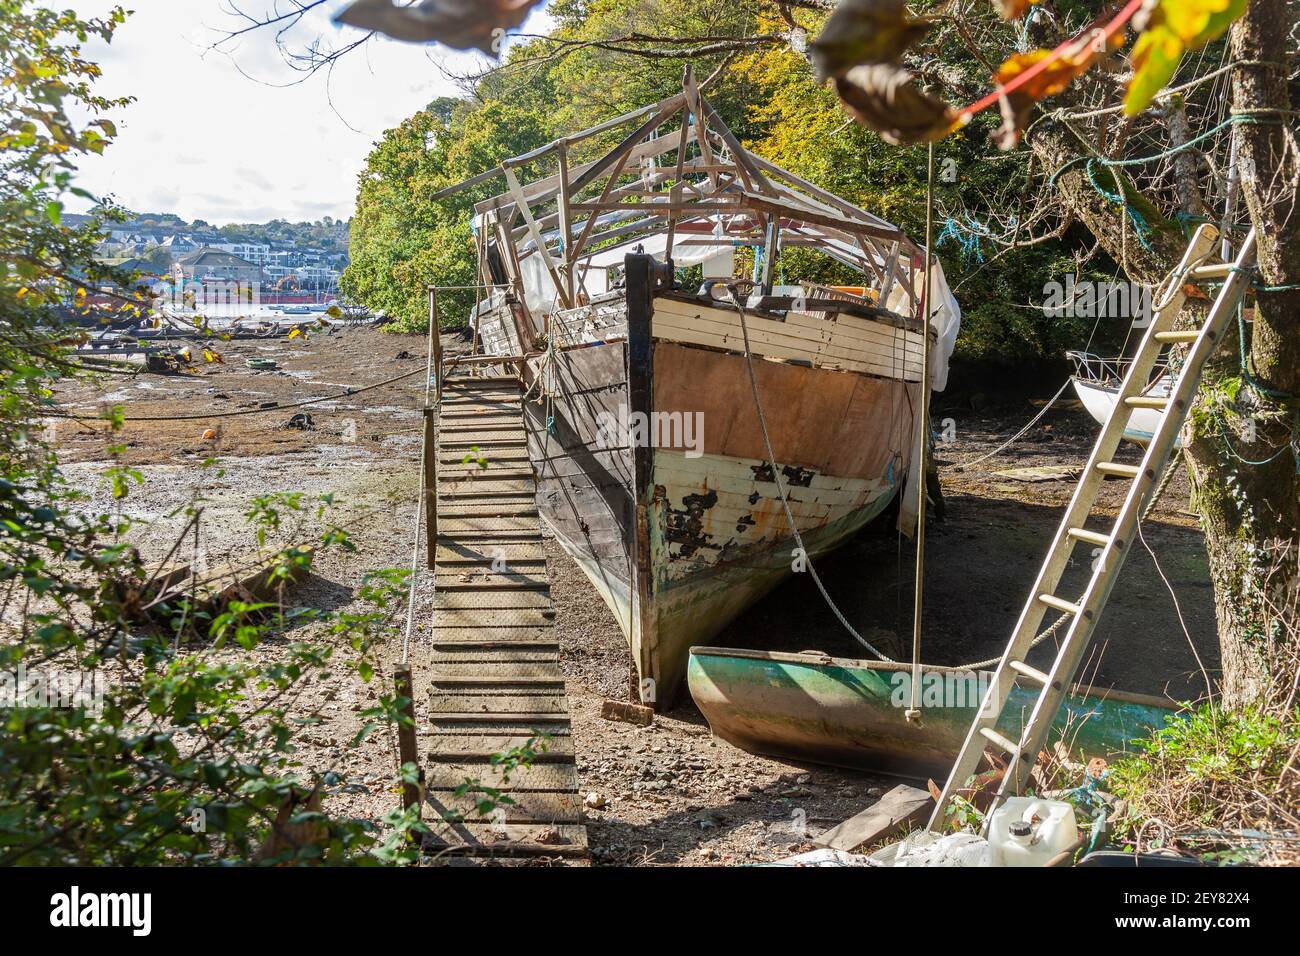 A boat being renovated at low tide in a sheltered creek near Falmouth and Penryn, Cornwall, UK Stock Photo